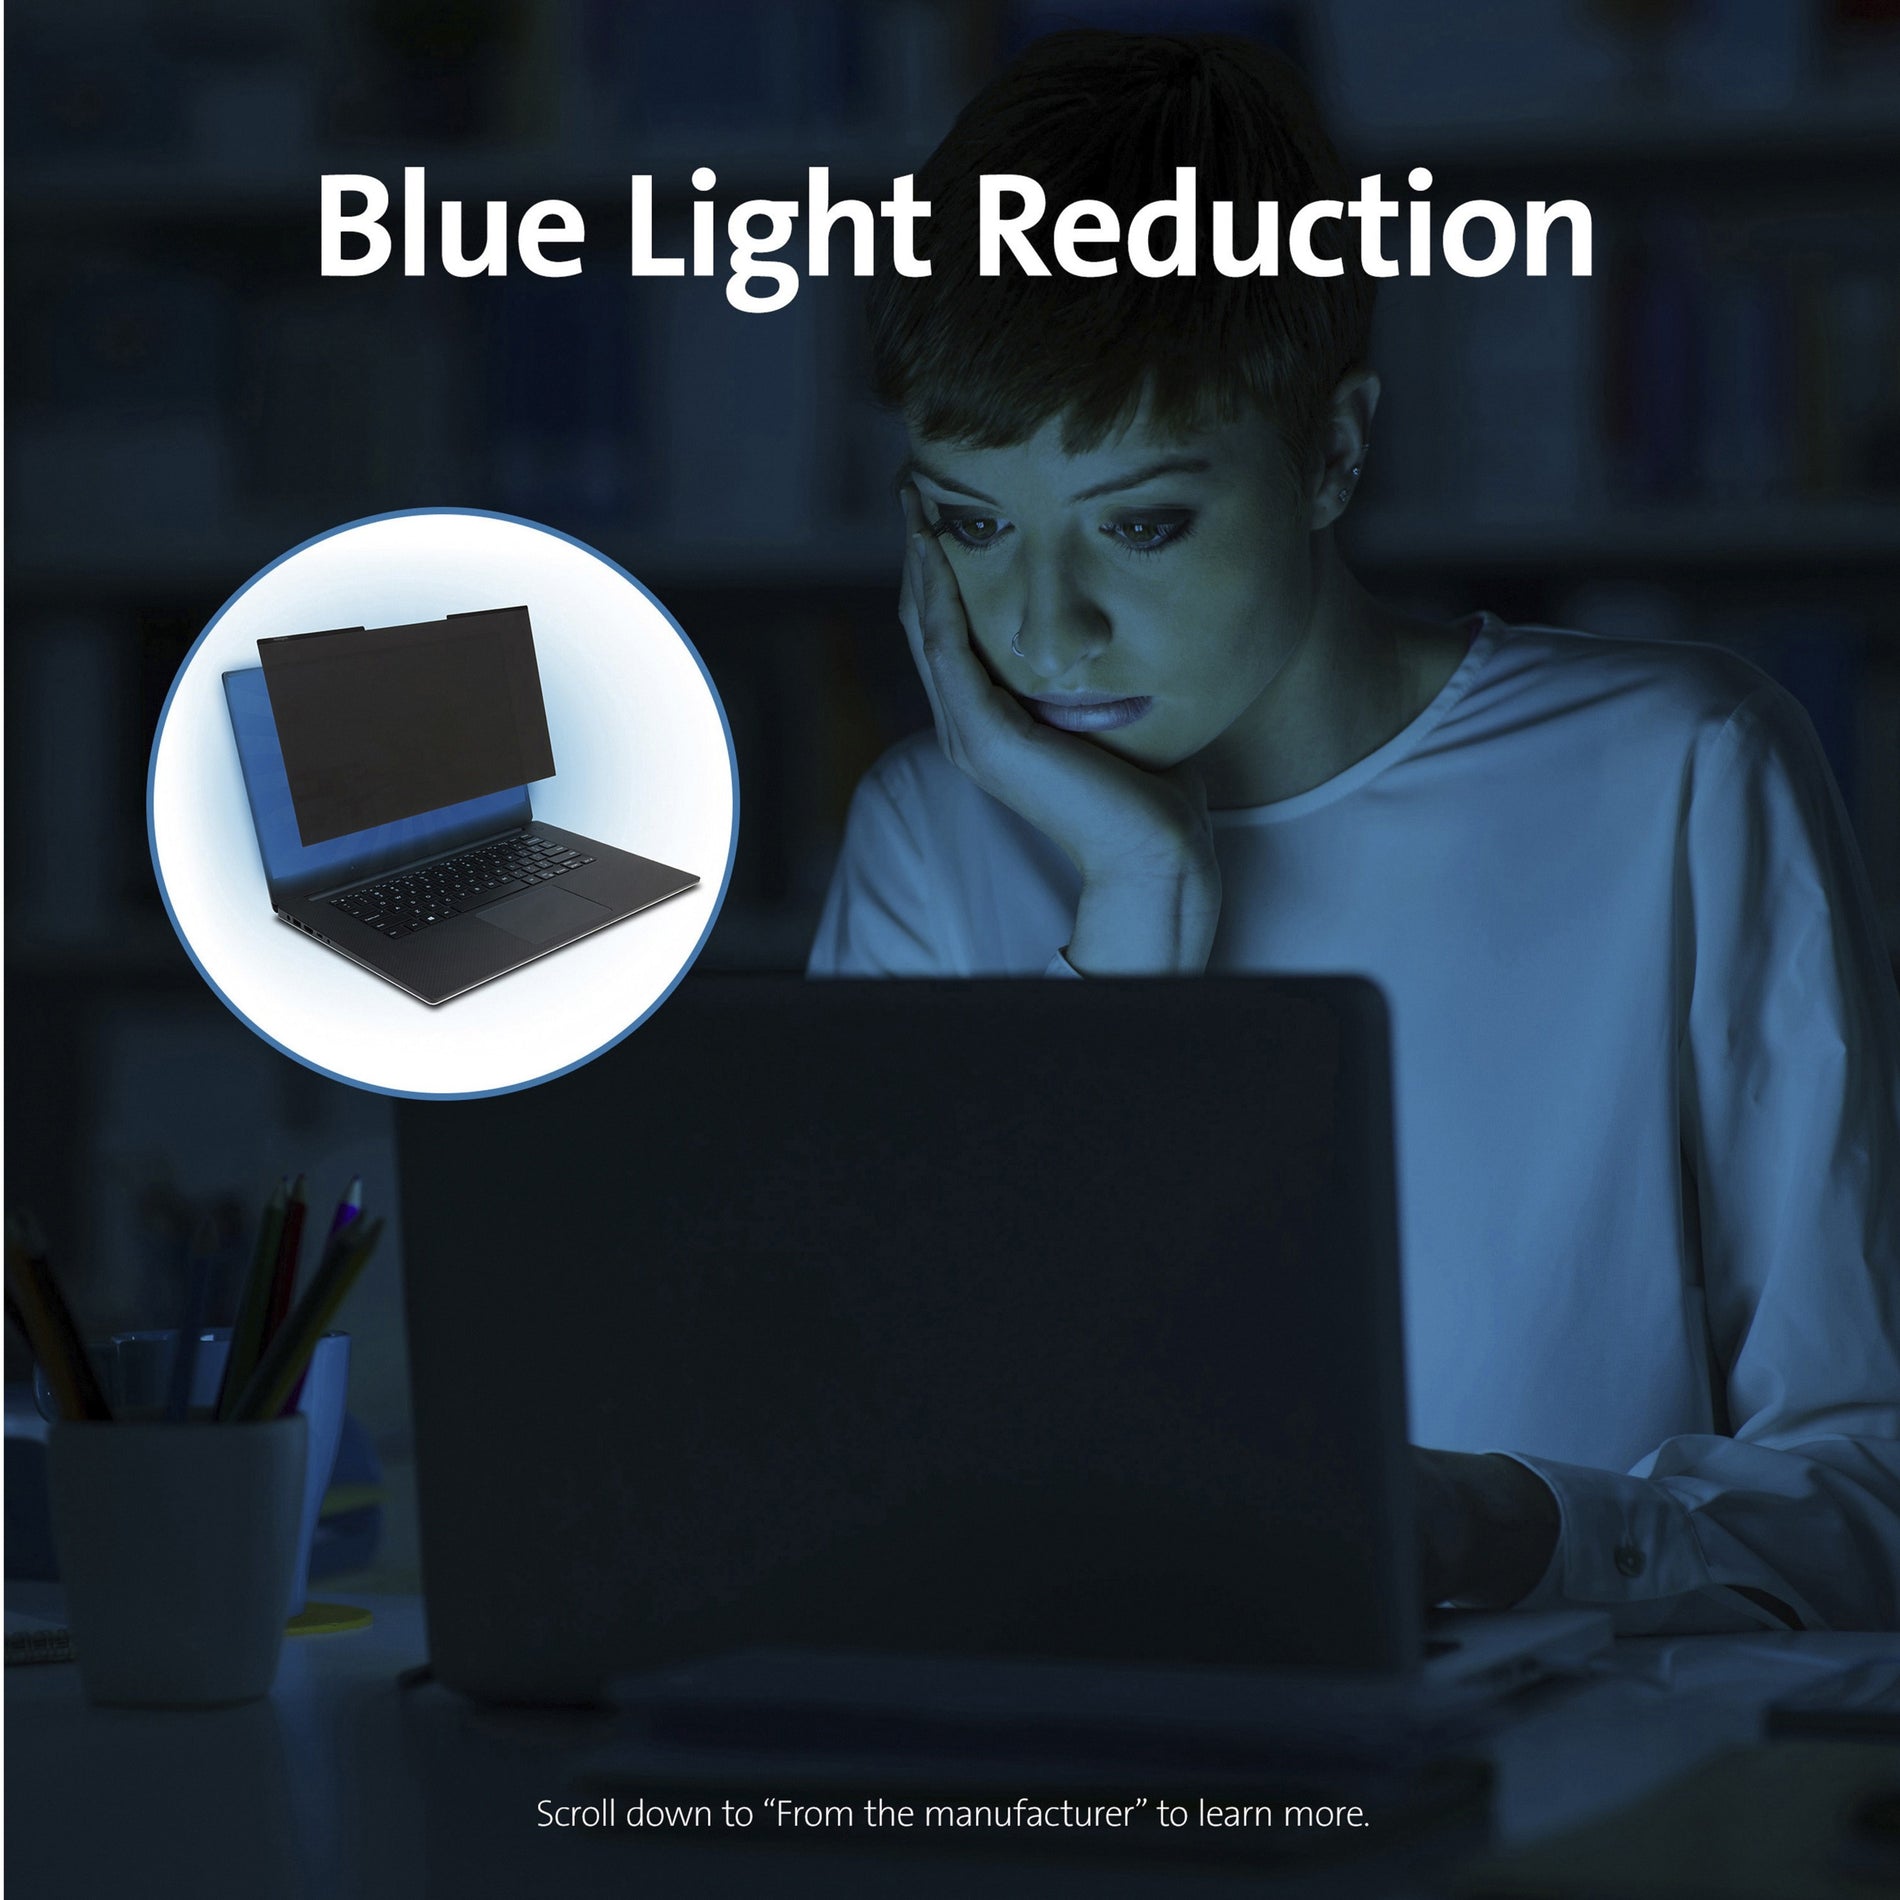 Kensington K58351WW MagPro 13.3" Laptop Privacy Screen with Magnetic Strip, Easy to Apply, Reversible, Low Reflective Coating, Blue Light Reduction